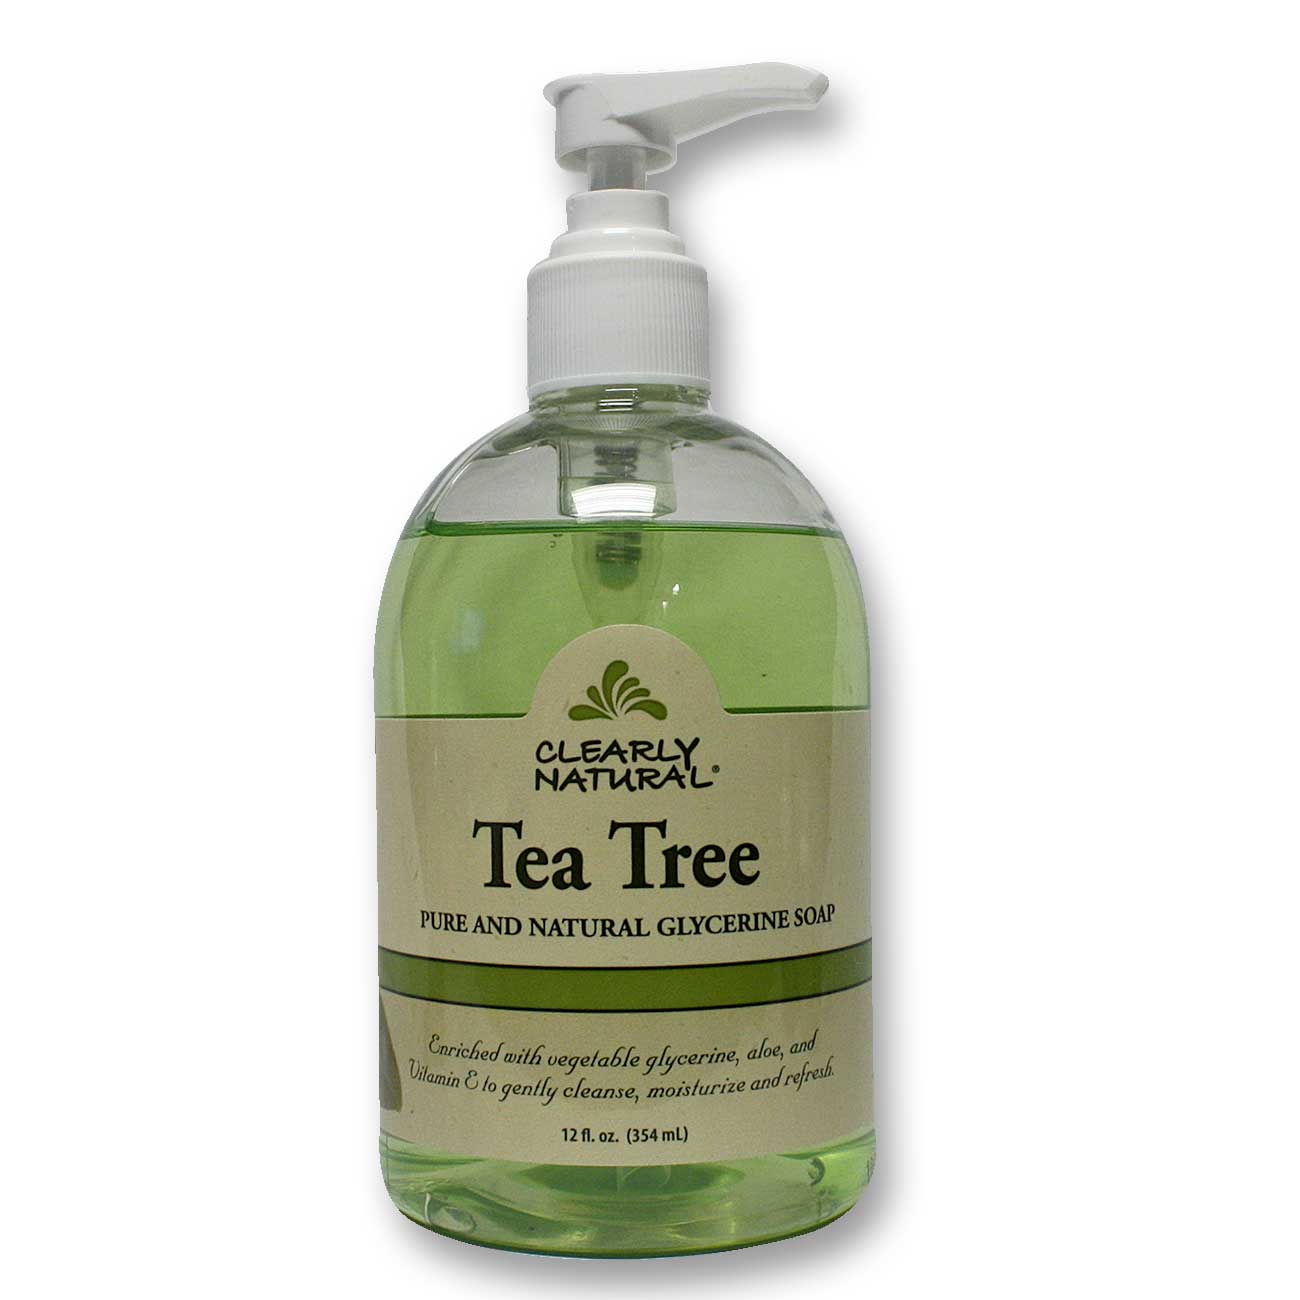 Clearly Natural Tea Tree Pure And Natural Glycerin Soap 12 Fl Oz